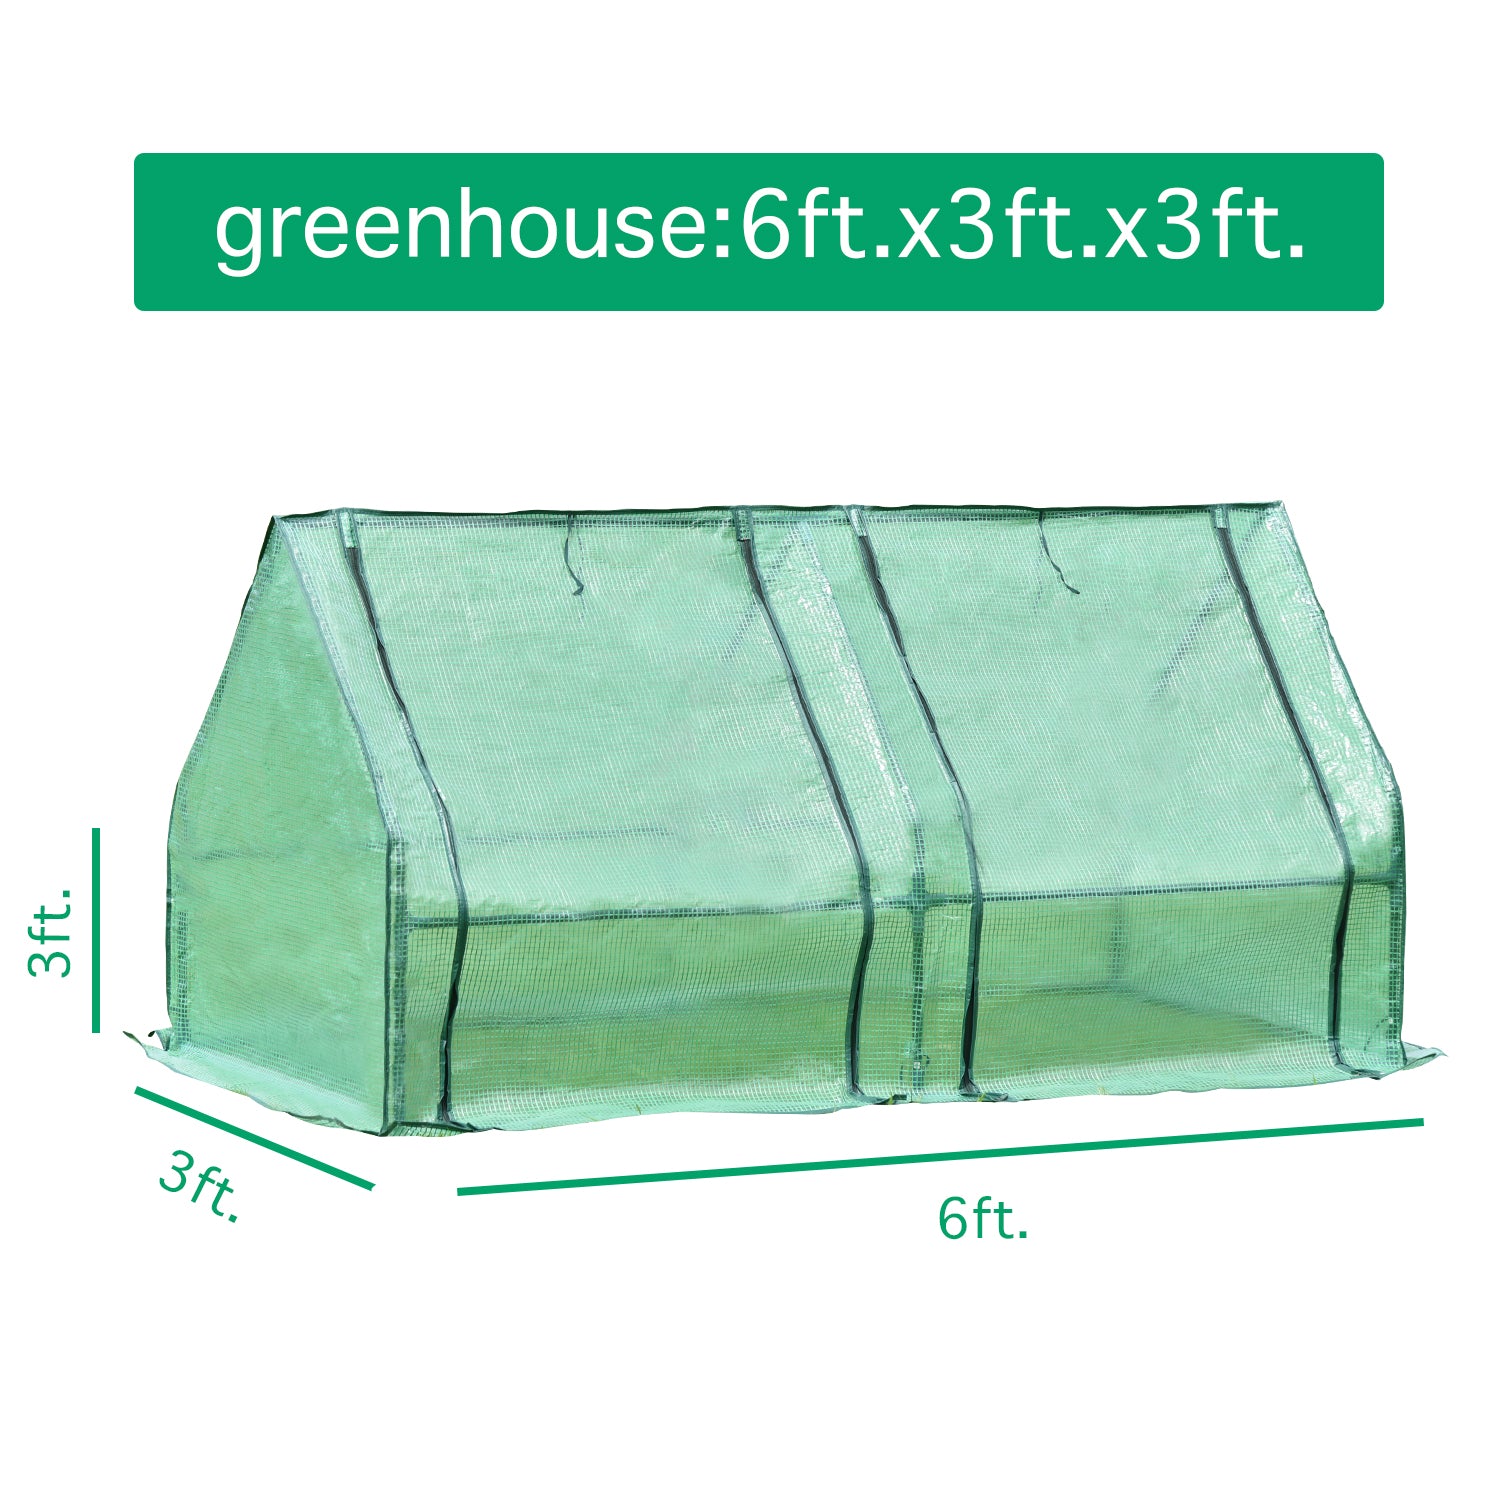 6 ft. x 3 ft. x 3ft. Mini Greenhouse with 2 Zipper Doors, Water Resistant UV Protected with 2 Covers Greenhouse Aoodor   